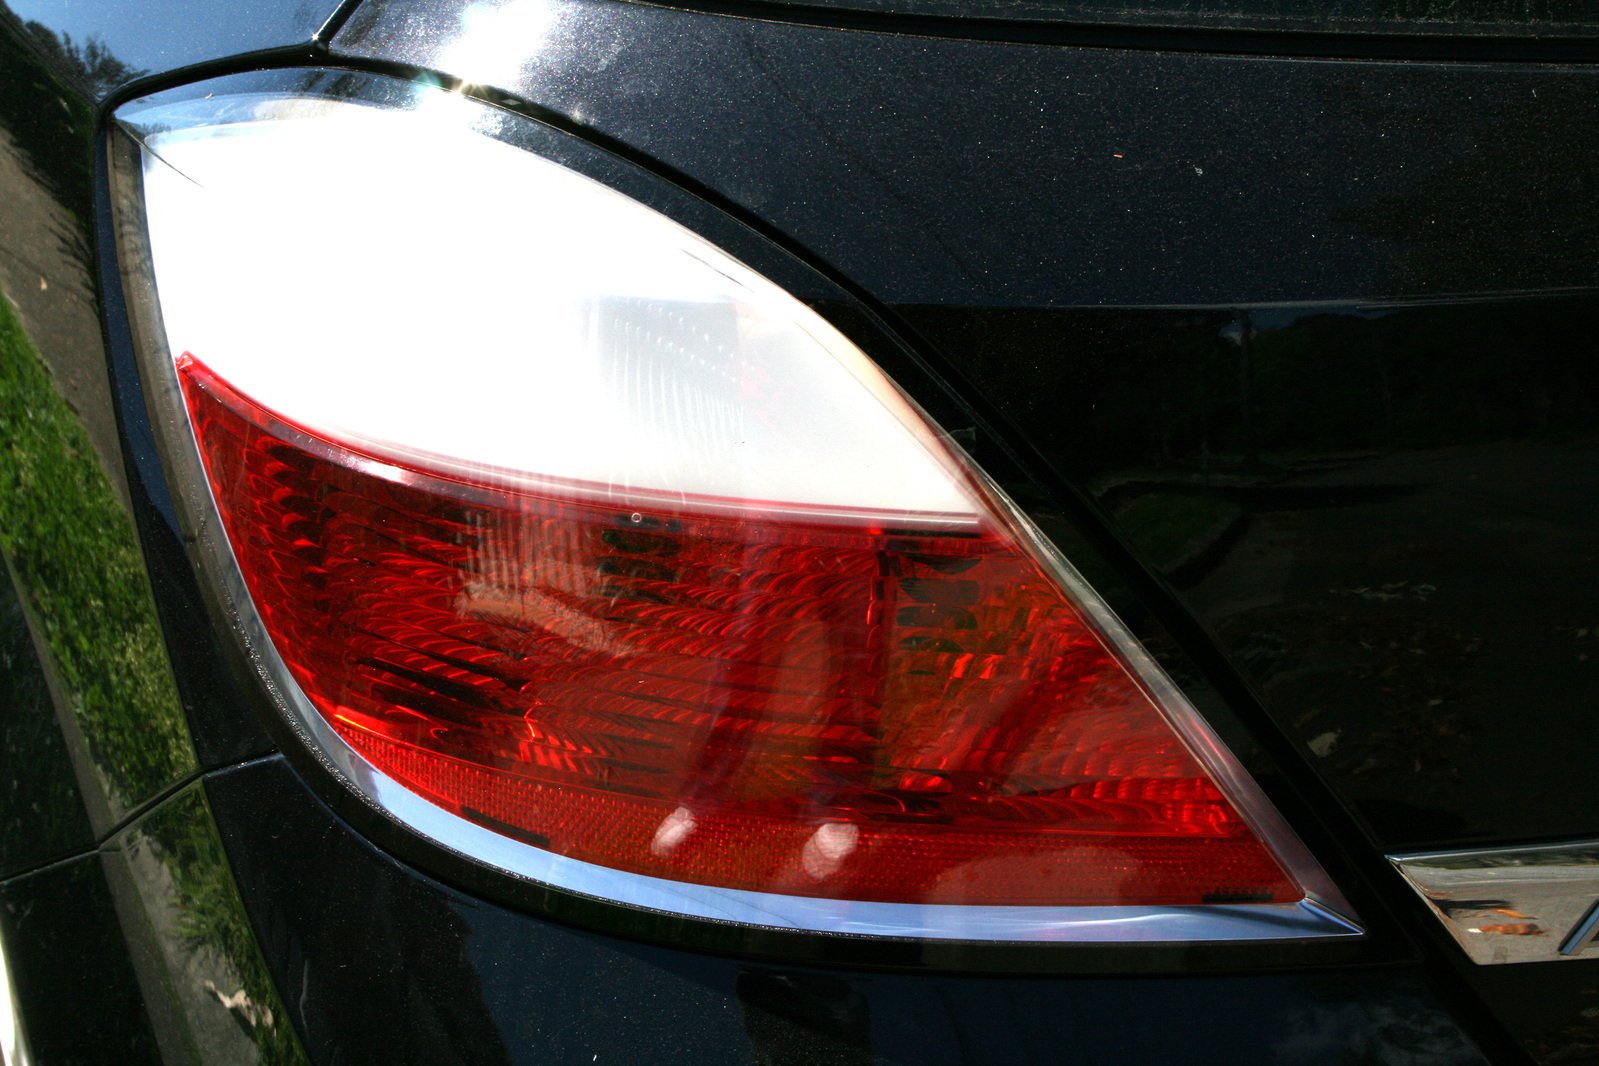 close up of the tail light of a vehicle